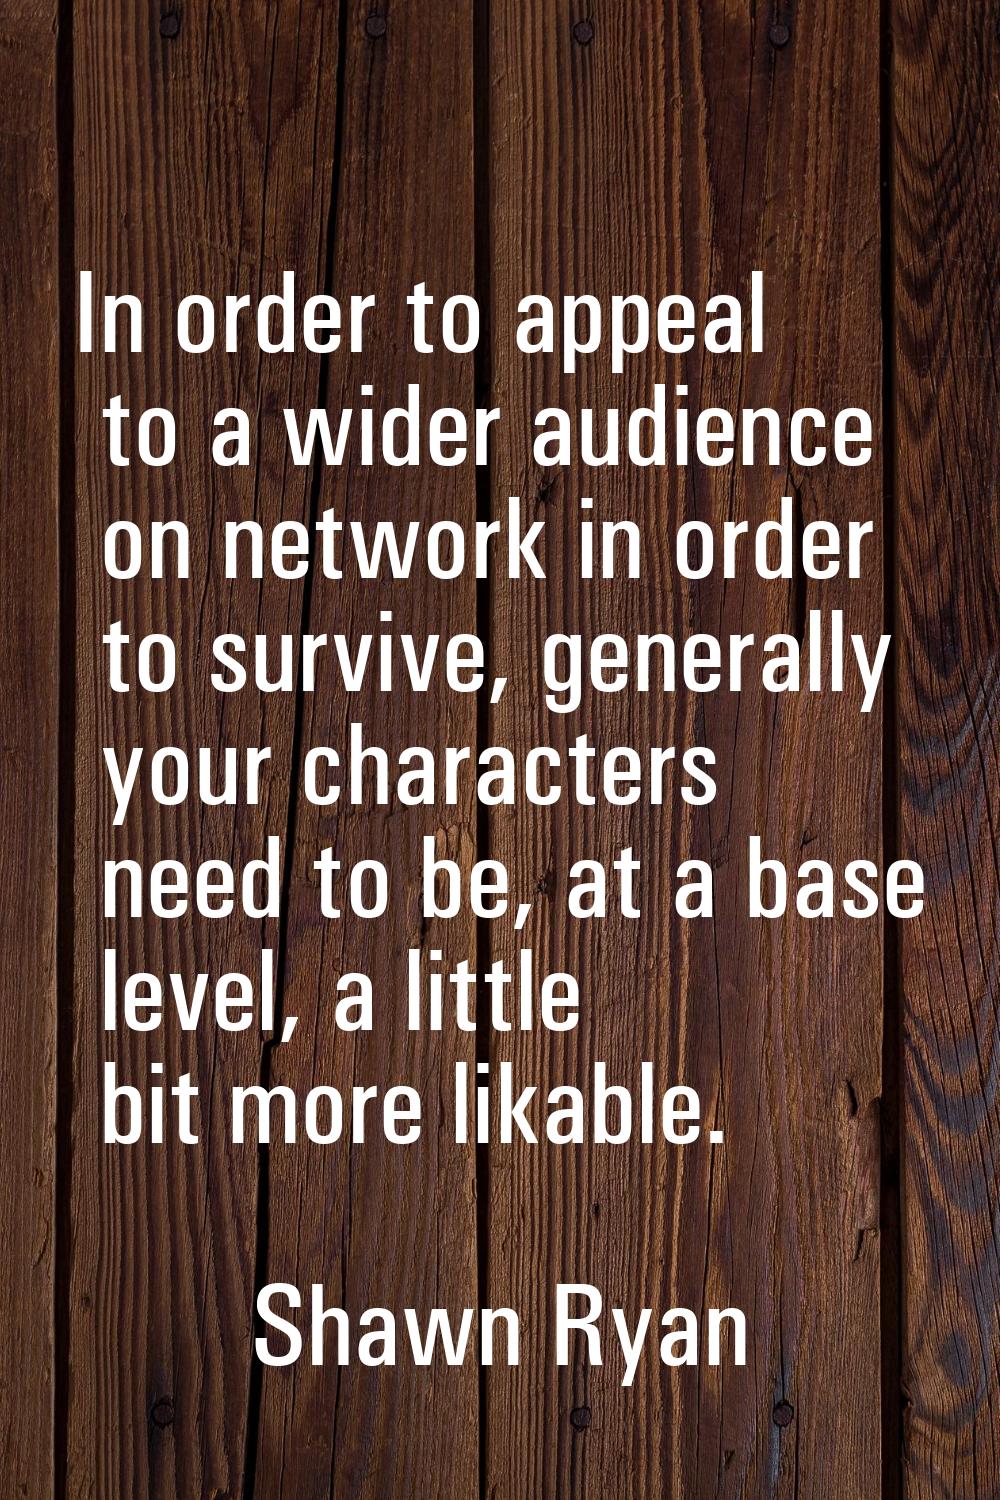 In order to appeal to a wider audience on network in order to survive, generally your characters ne